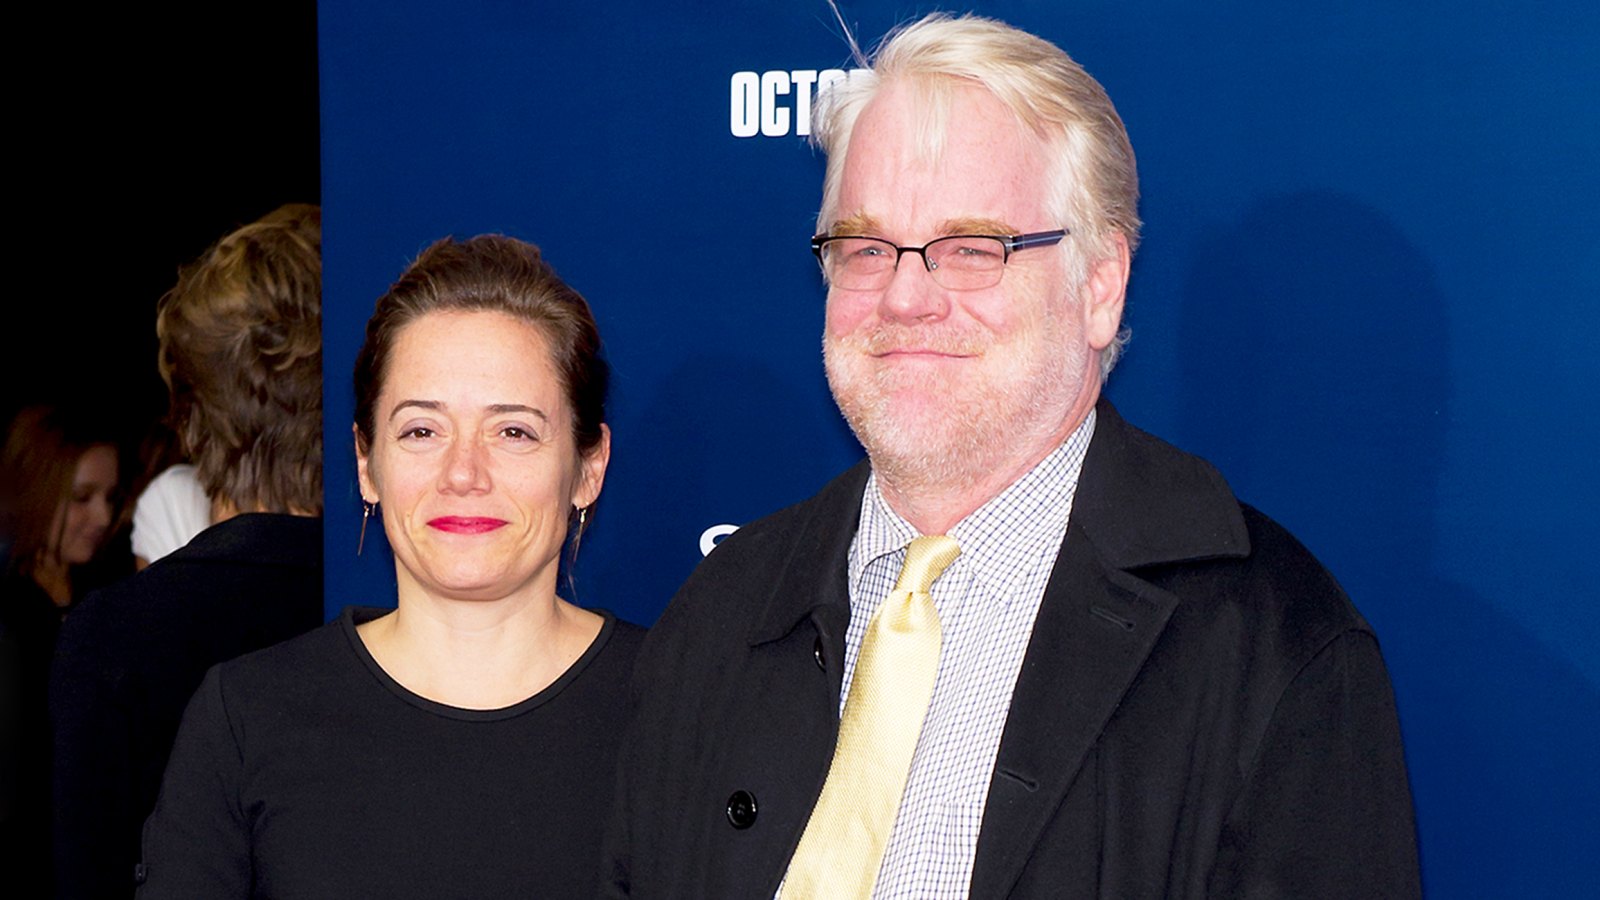 Mimi O'Donnell and Philip Seymour Hoffman attend the premiere of "The Ides of March" at the Ziegfeld Theater on October 5, 2011 in New York City.